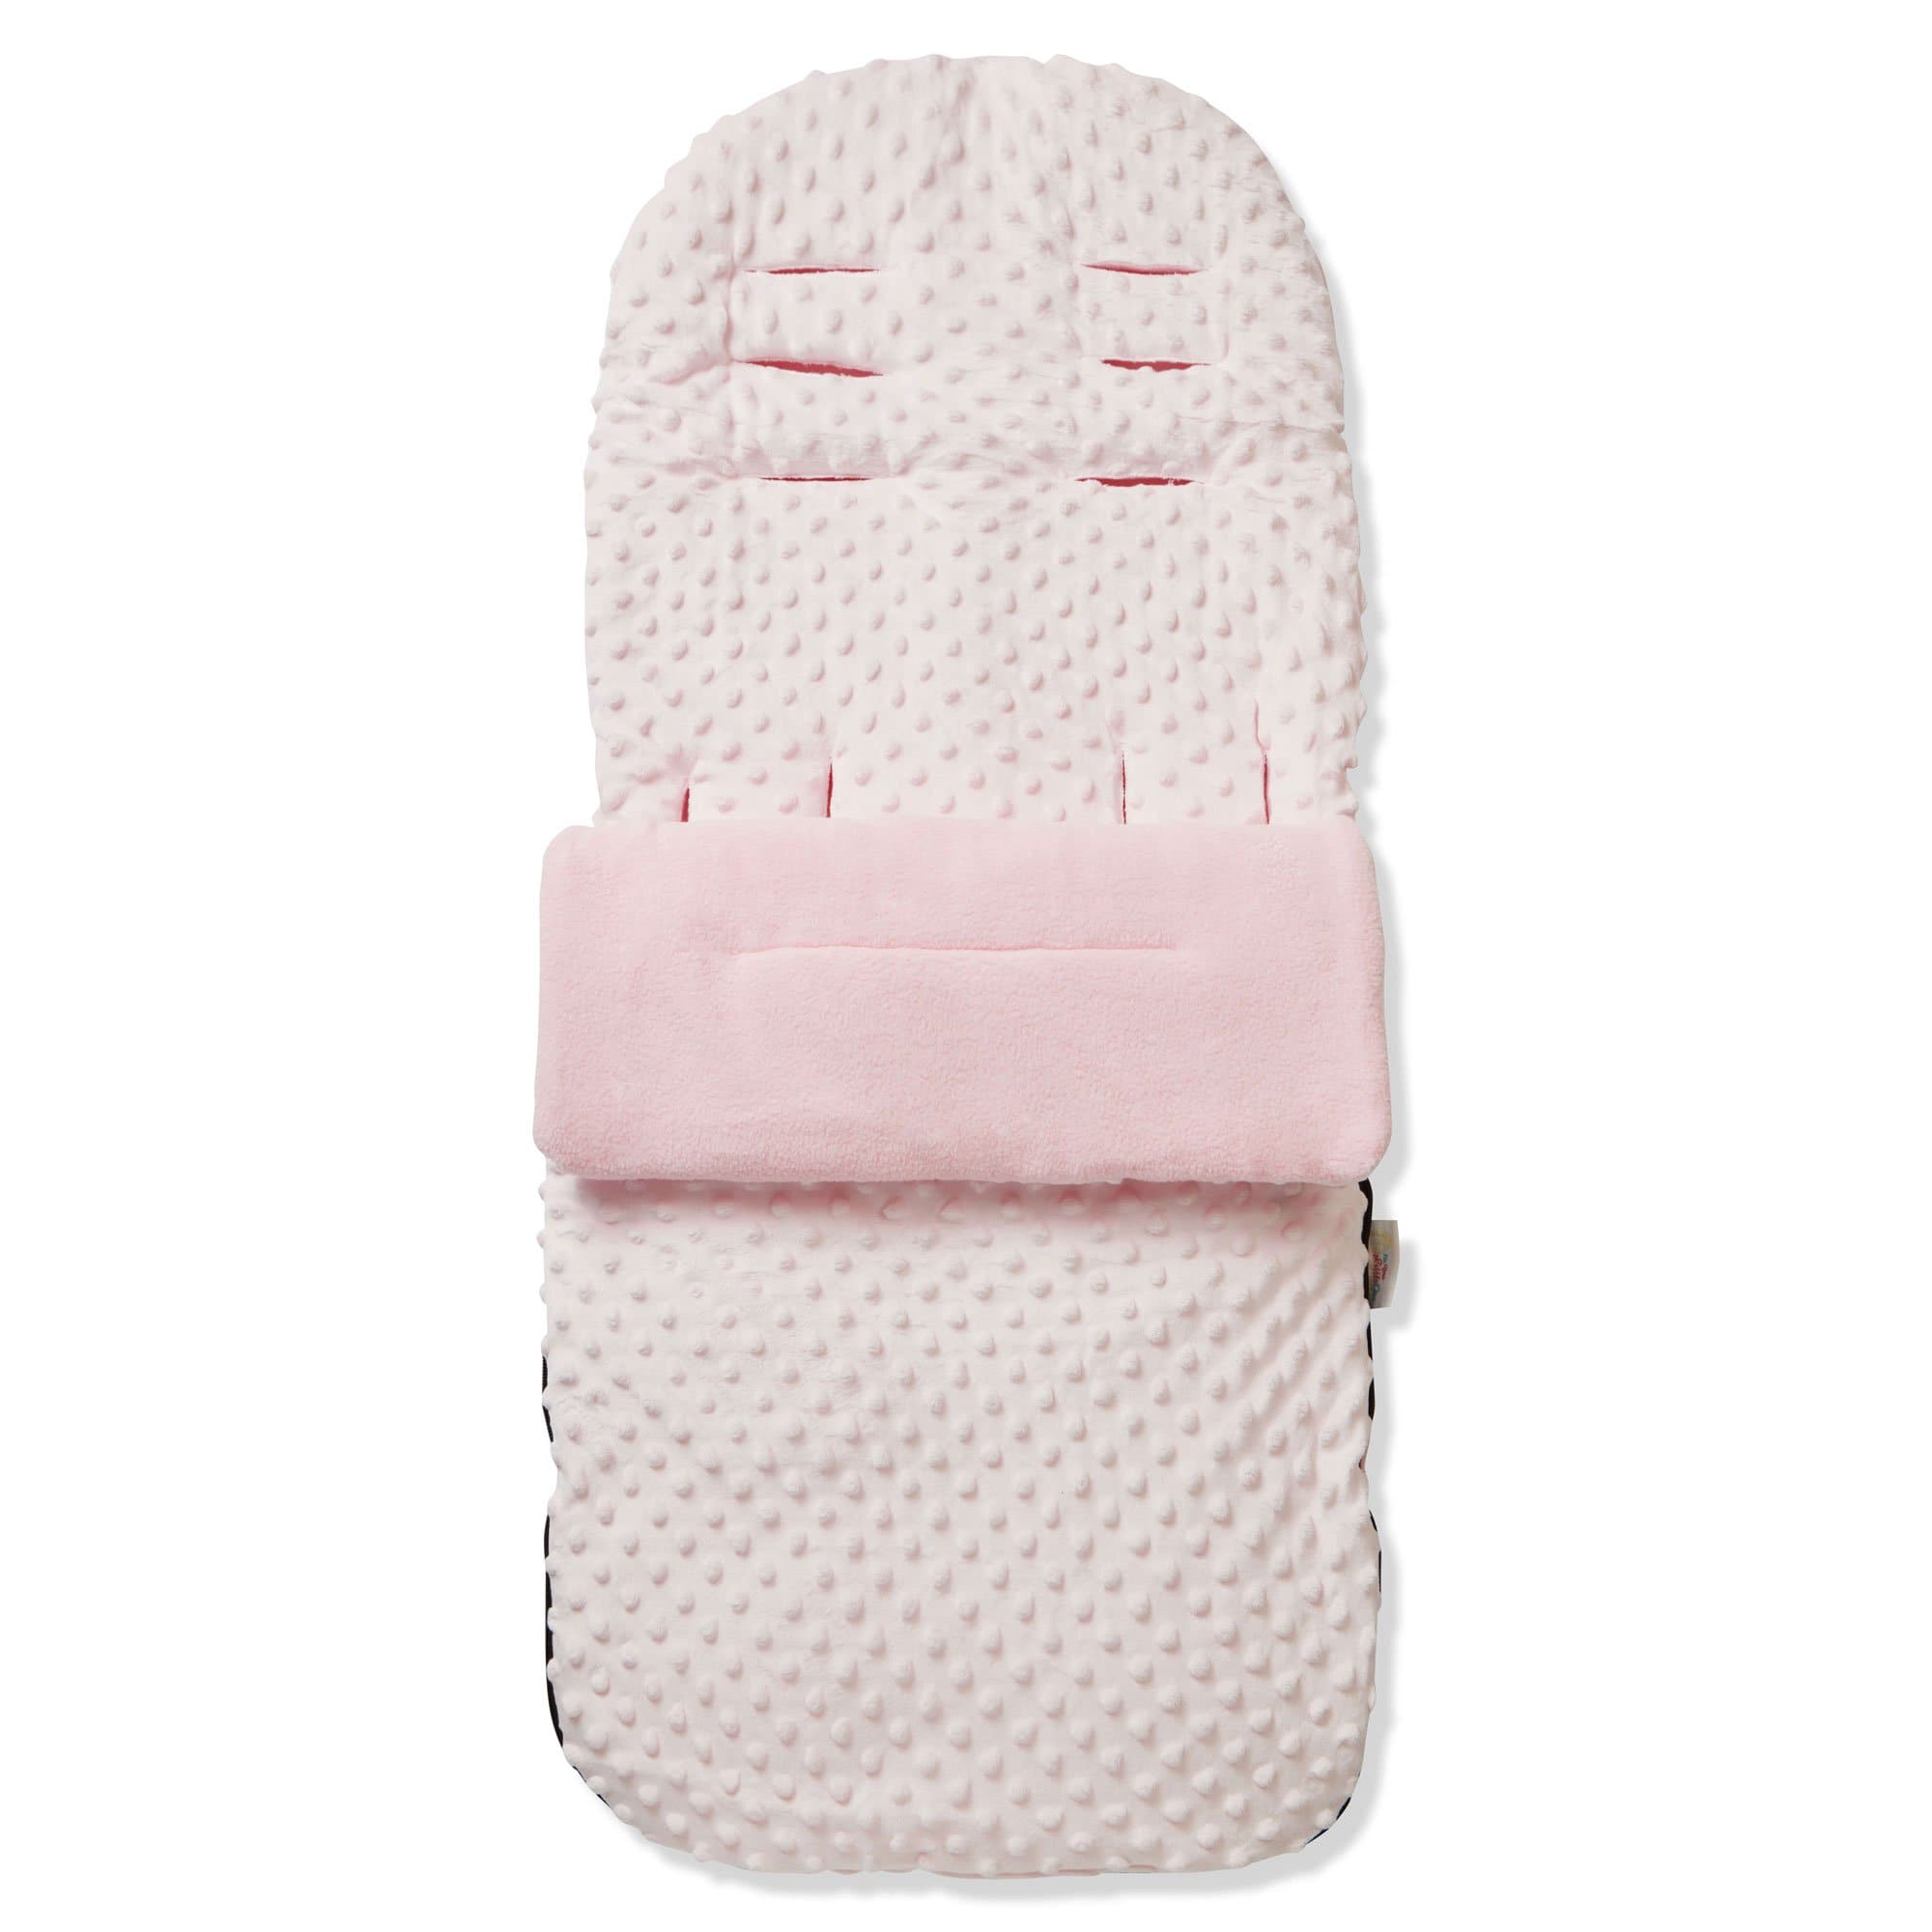 Dimple Footmuff / Cosy Toes Compatible with Quinny - Pink / Fits All Models | For Your Little One